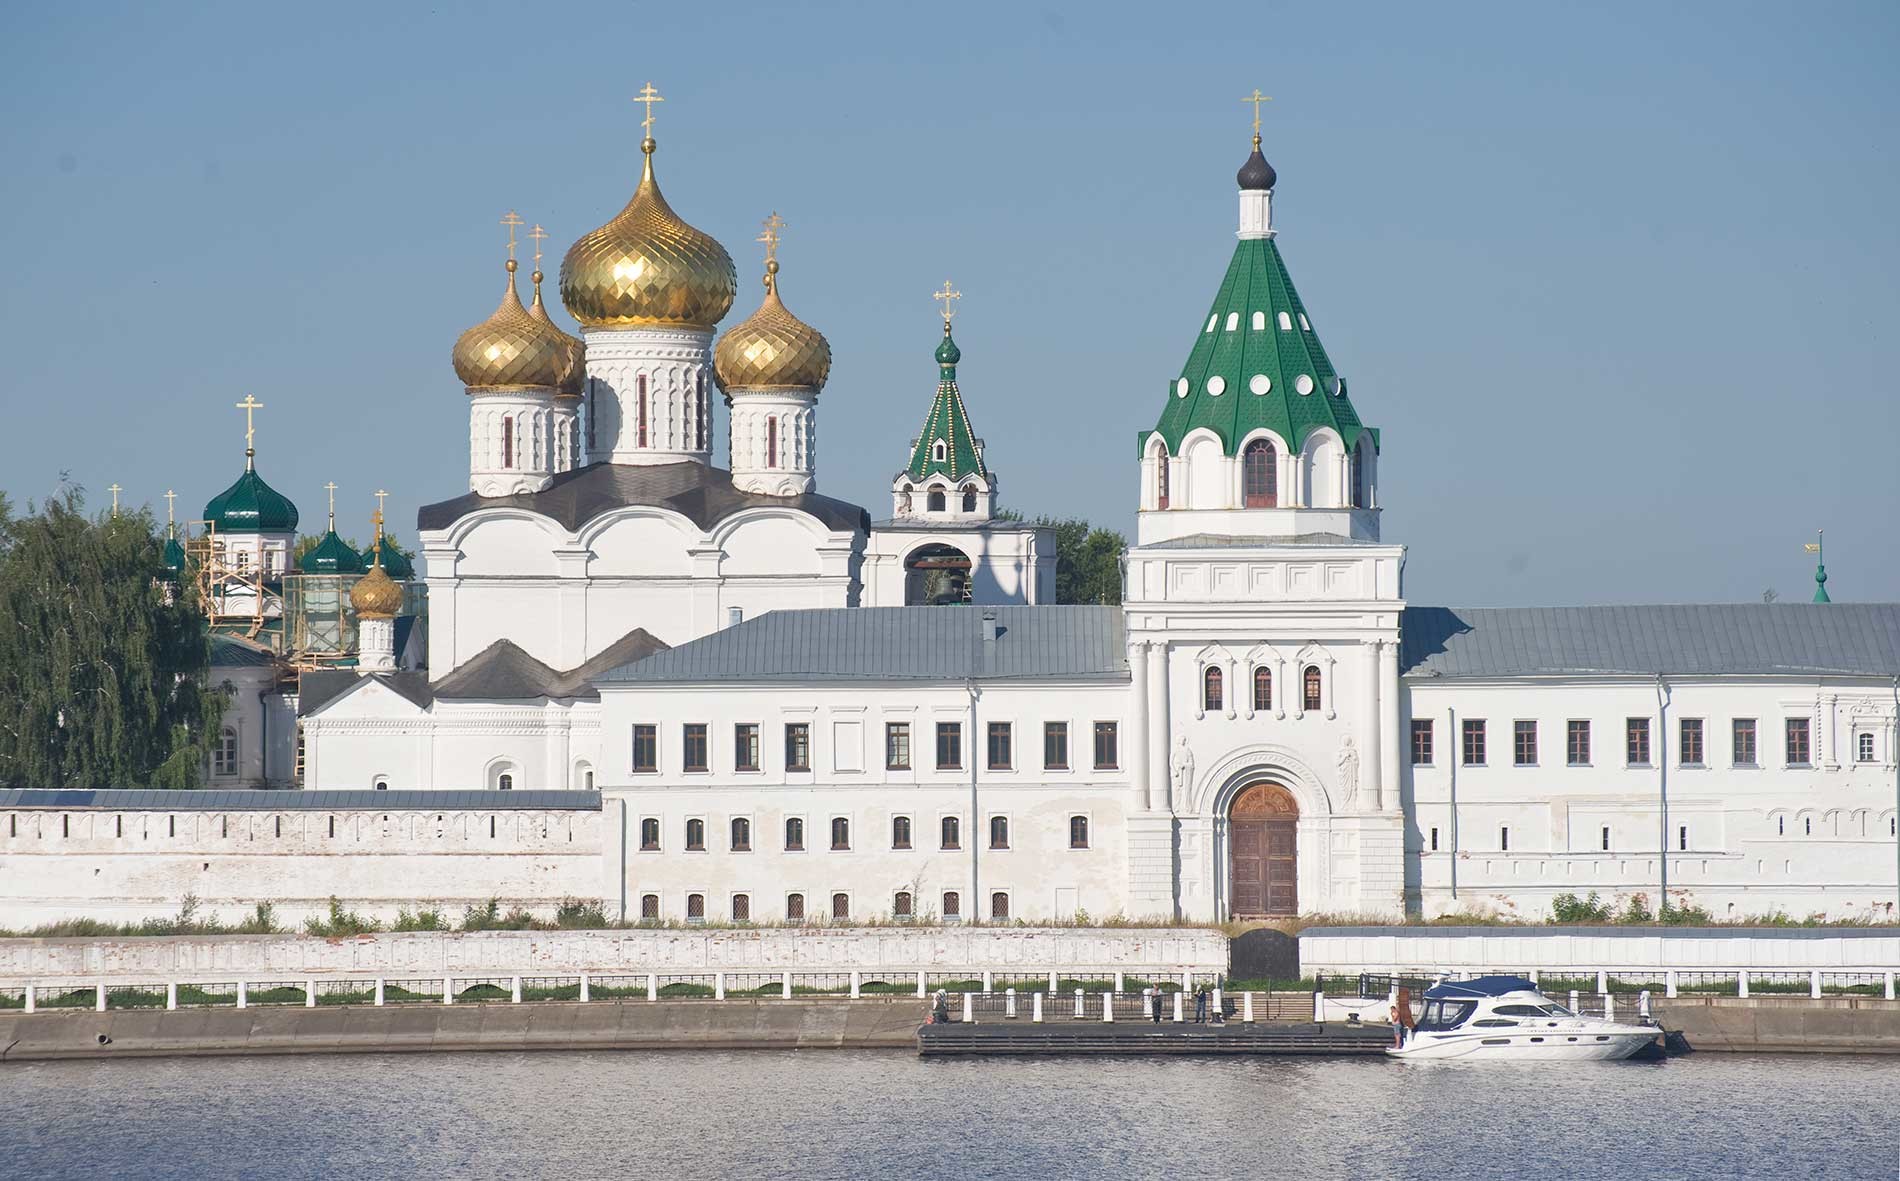 Trinity-Ipatiev Monastery, east view across Kostroma River. From left: Cathedral of Nativity of the Virgin; Trinity Cathedral; bell tower; Archbishop's Cloisters with Gate Church of Sts. Chrysanthus & Daria. Aug. 13, 2017.